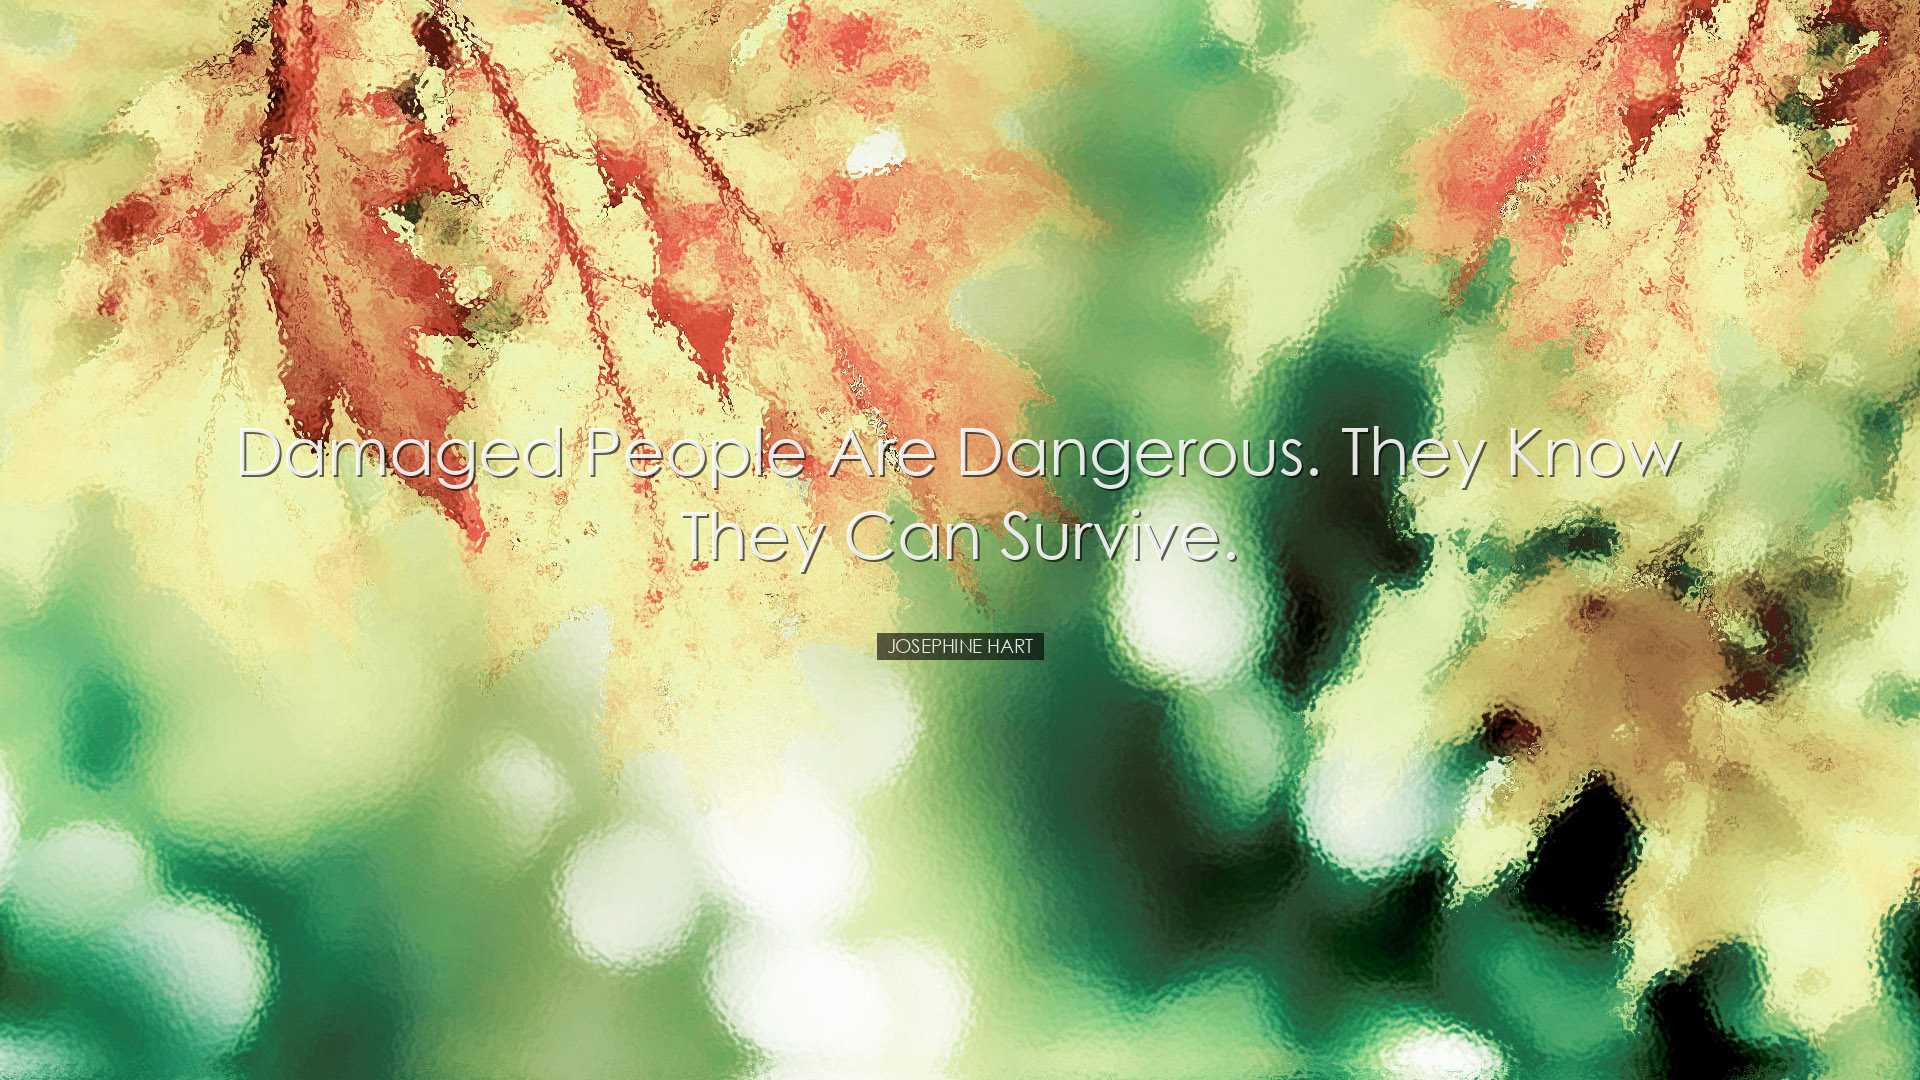 Damaged people are dangerous. They know they can survive. - Joseph